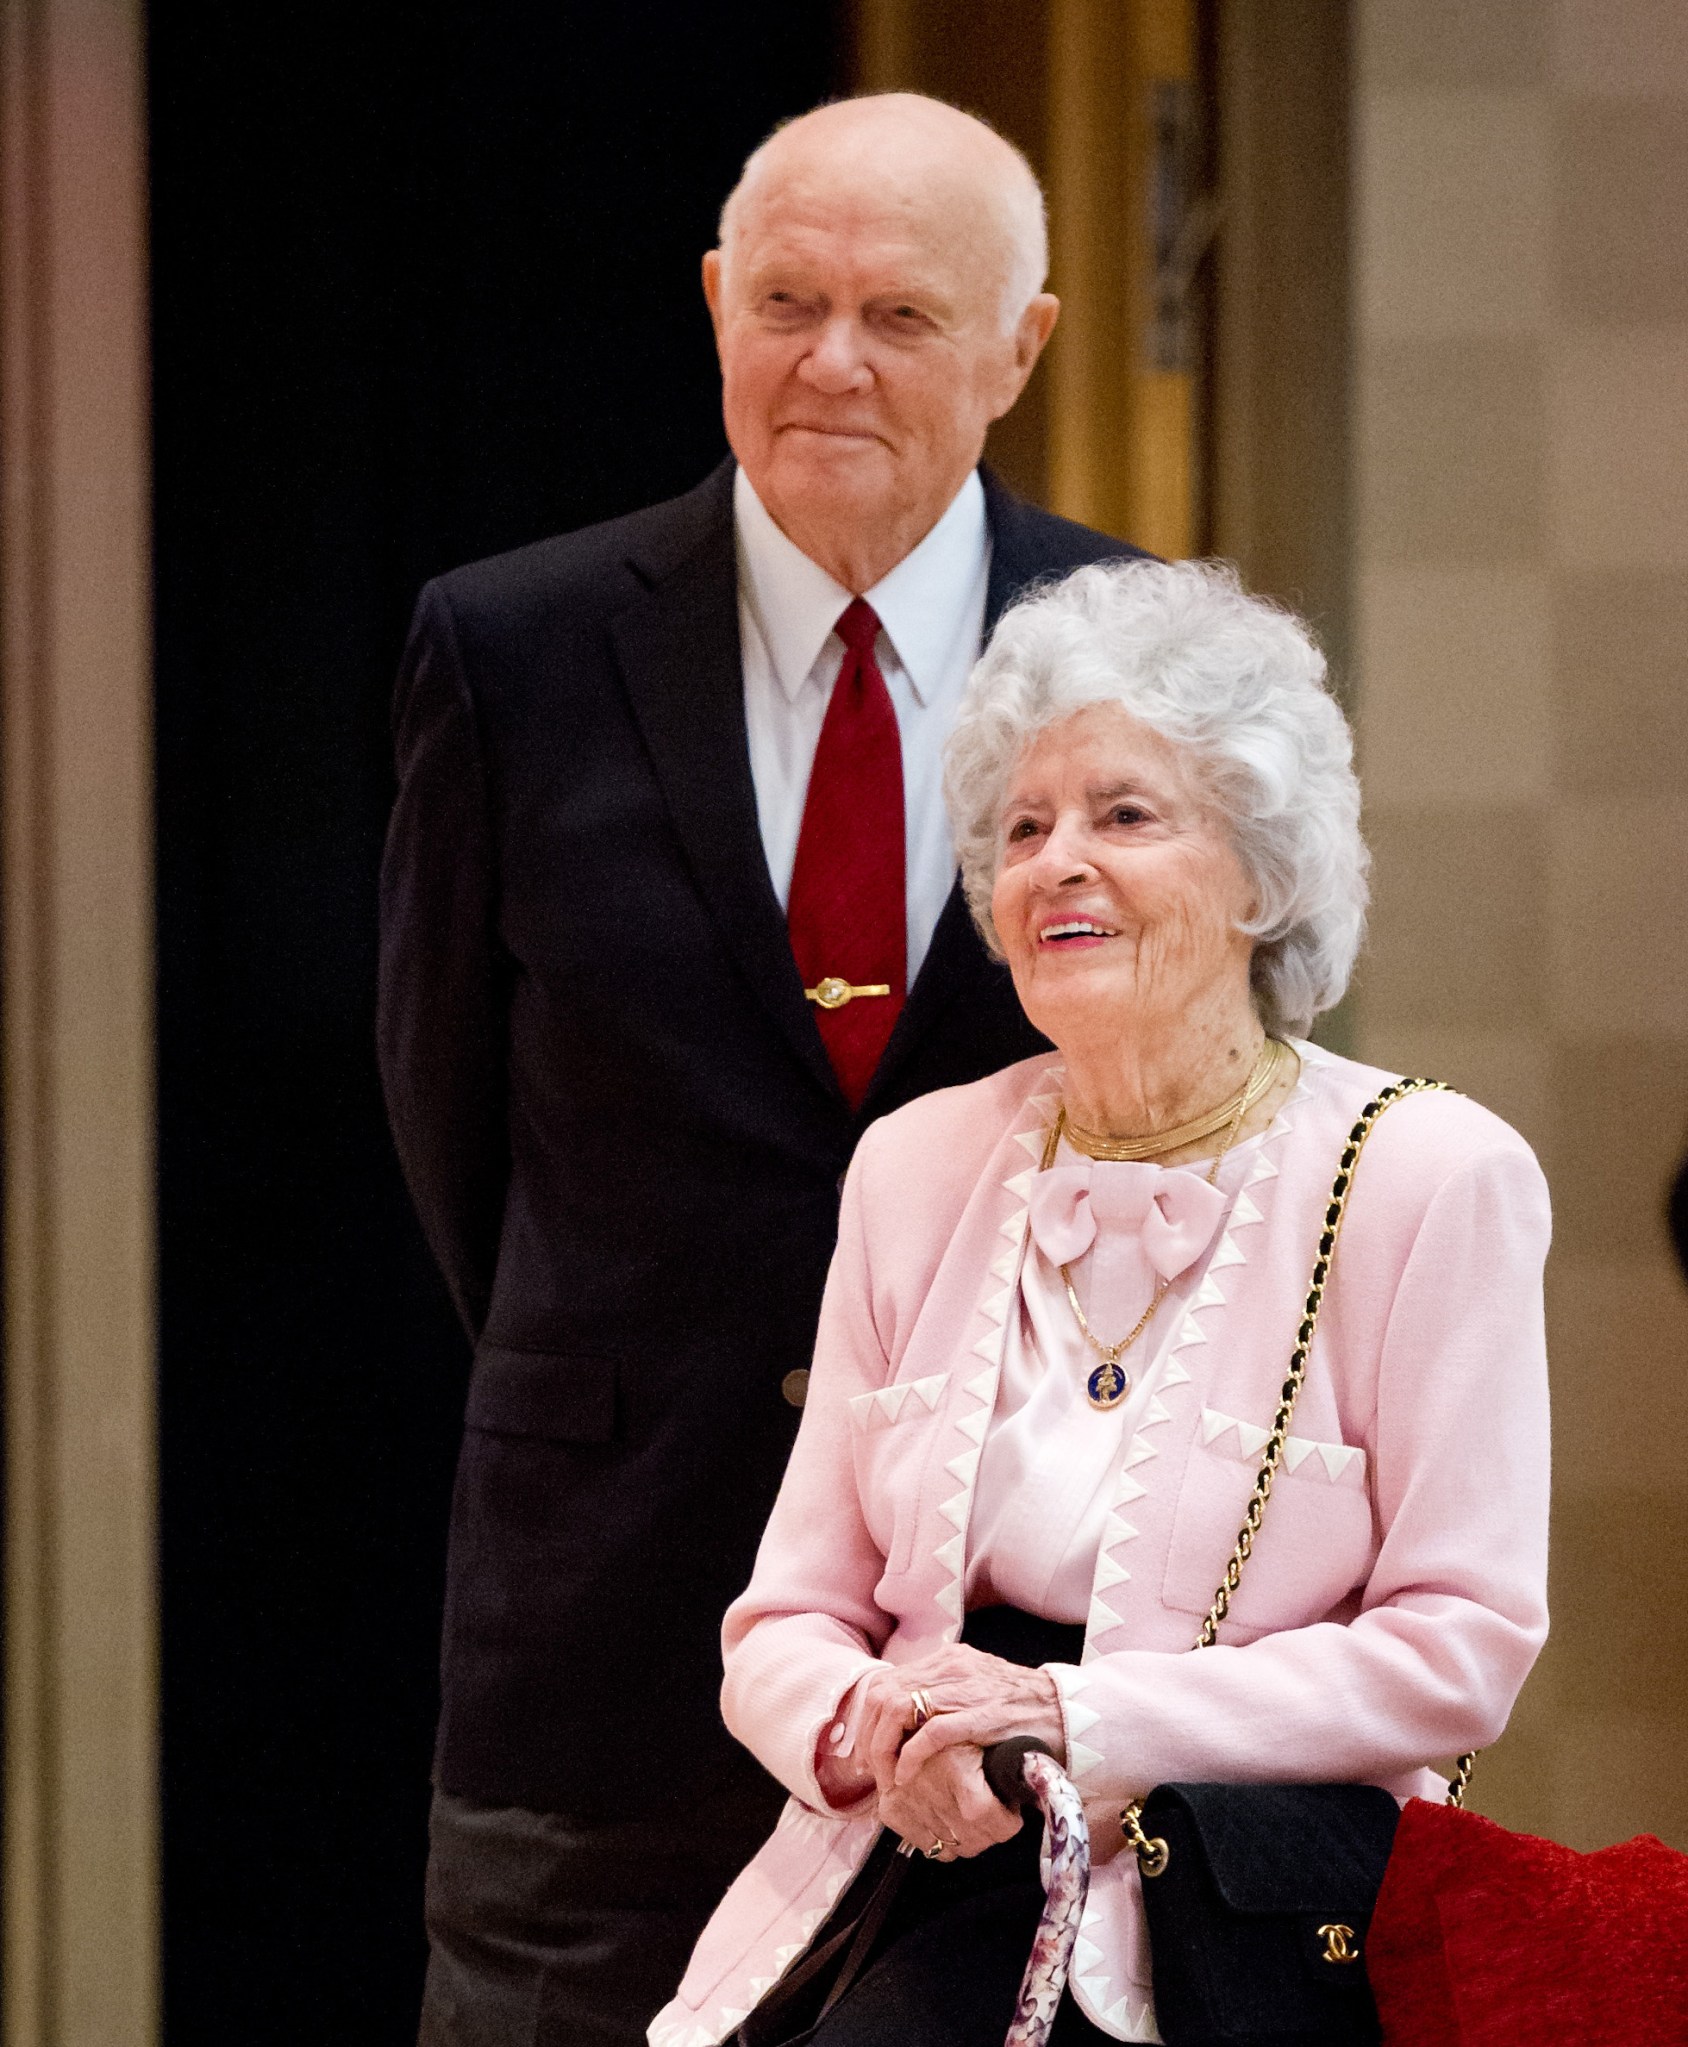 Sen. John Glenn and his wife Annie listen to speakers during a reception at Ohio State University in 2012.